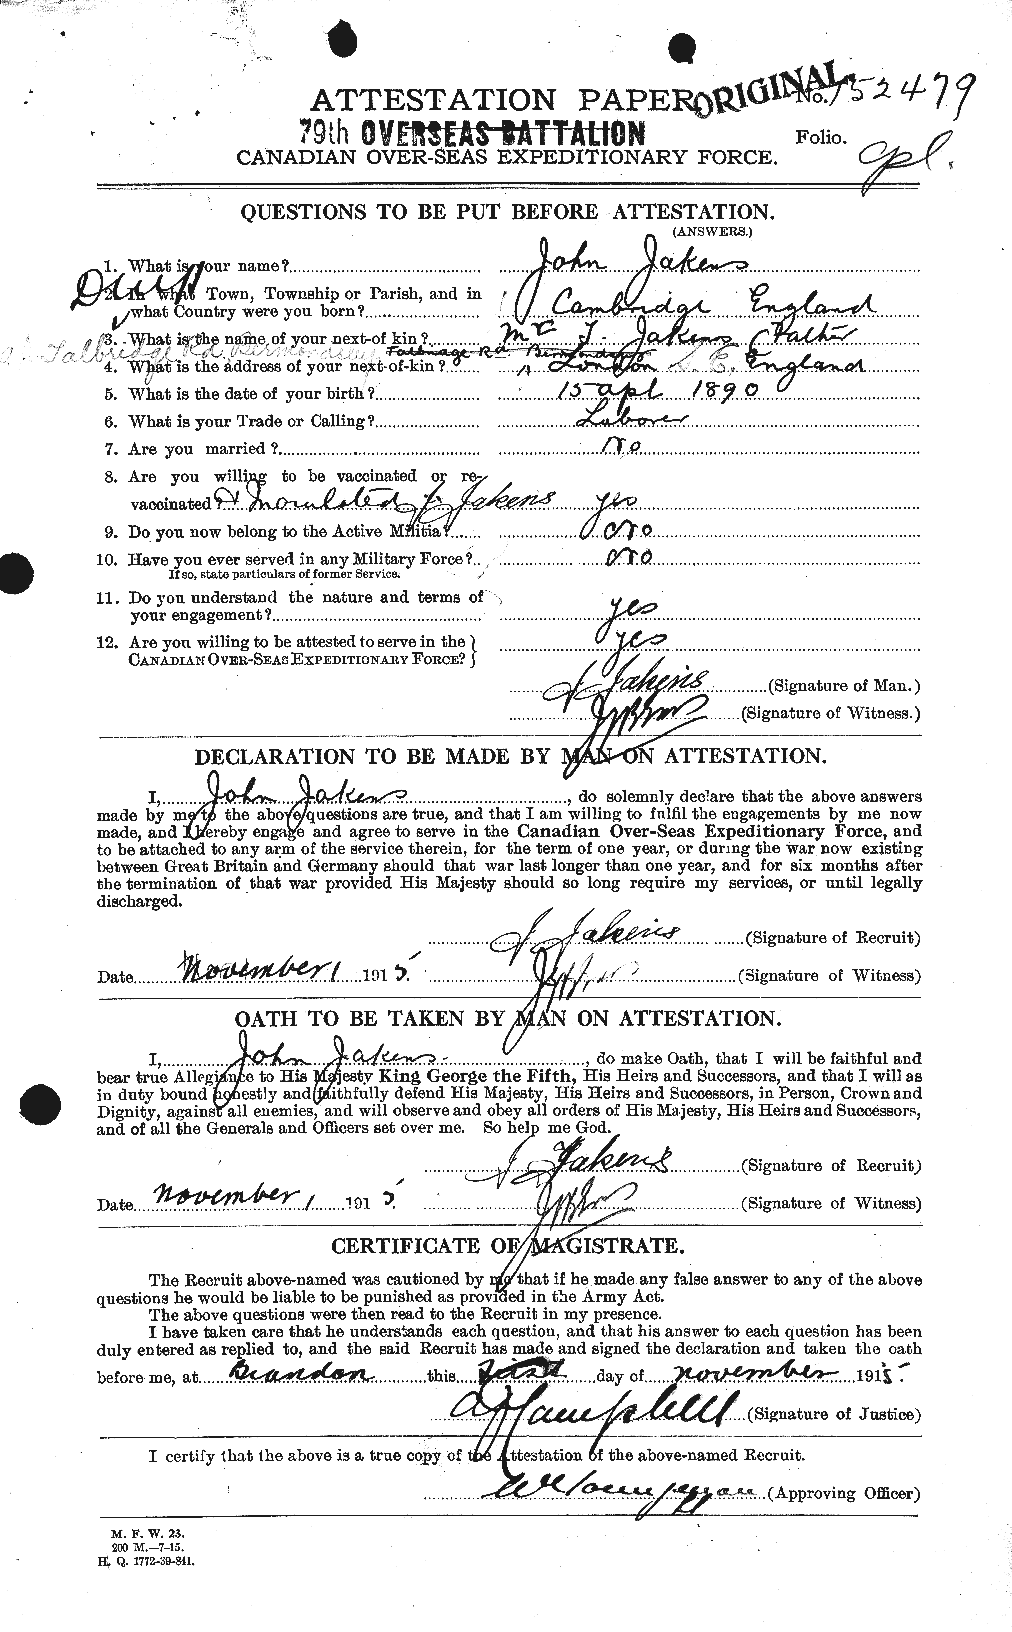 Personnel Records of the First World War - CEF 415802a